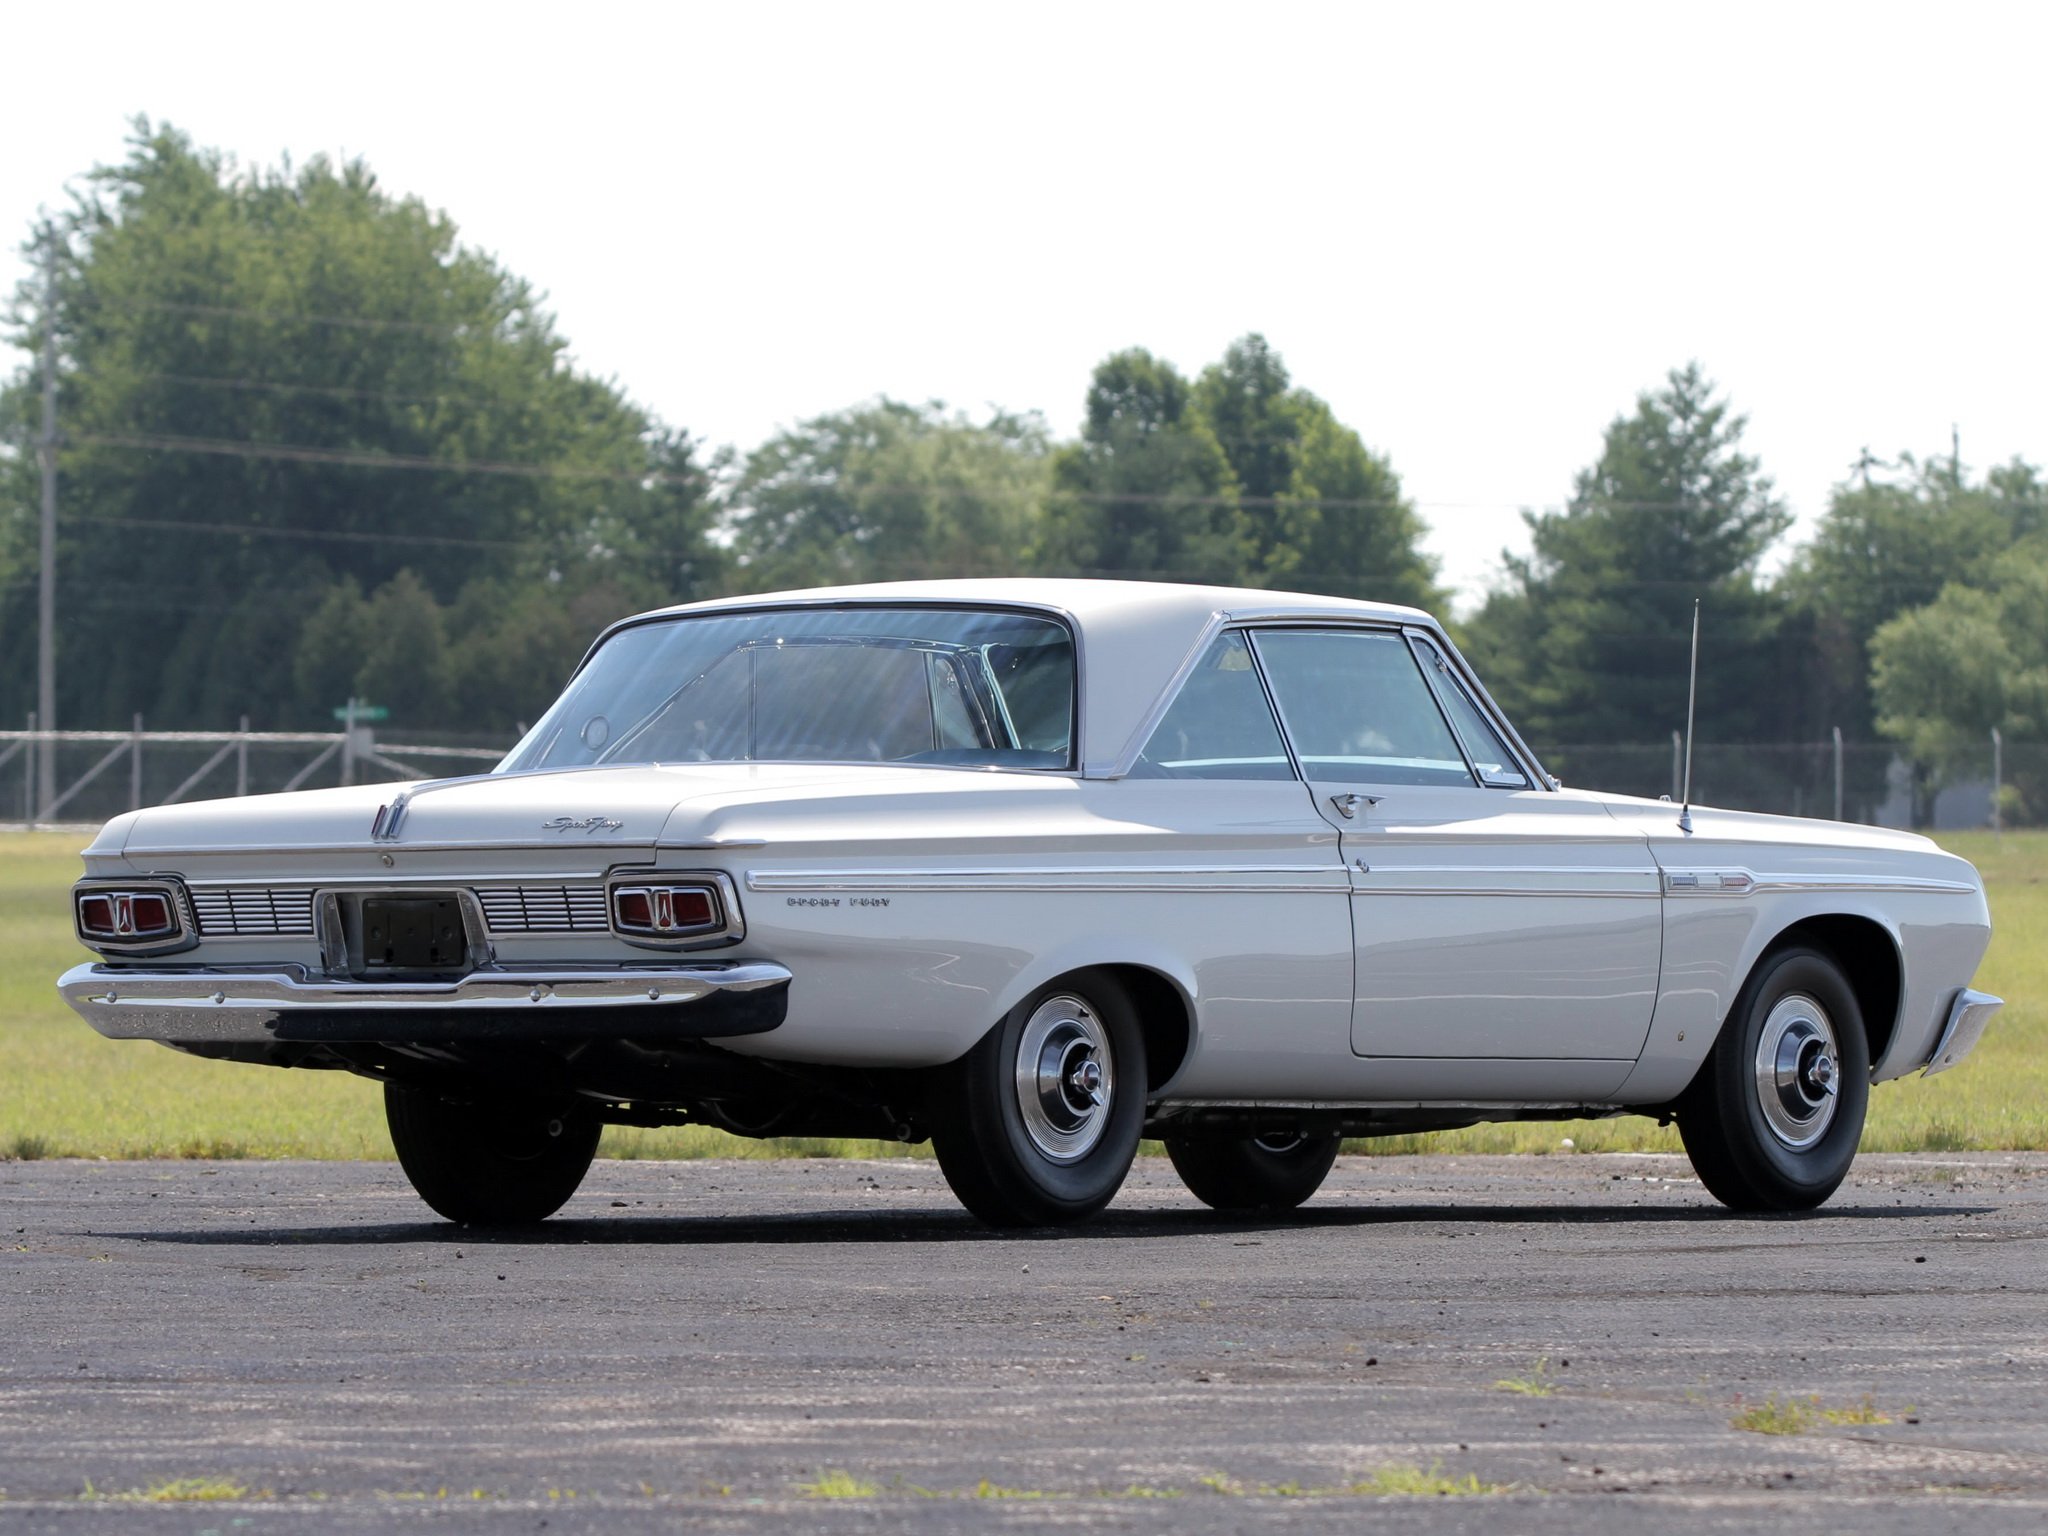 1964, Plymouth, Sport, Fury, 426, Max wedge, Stage iii, Hardtop, Coupe,  vp2 p 342 , Muscle, Classic Wallpaper